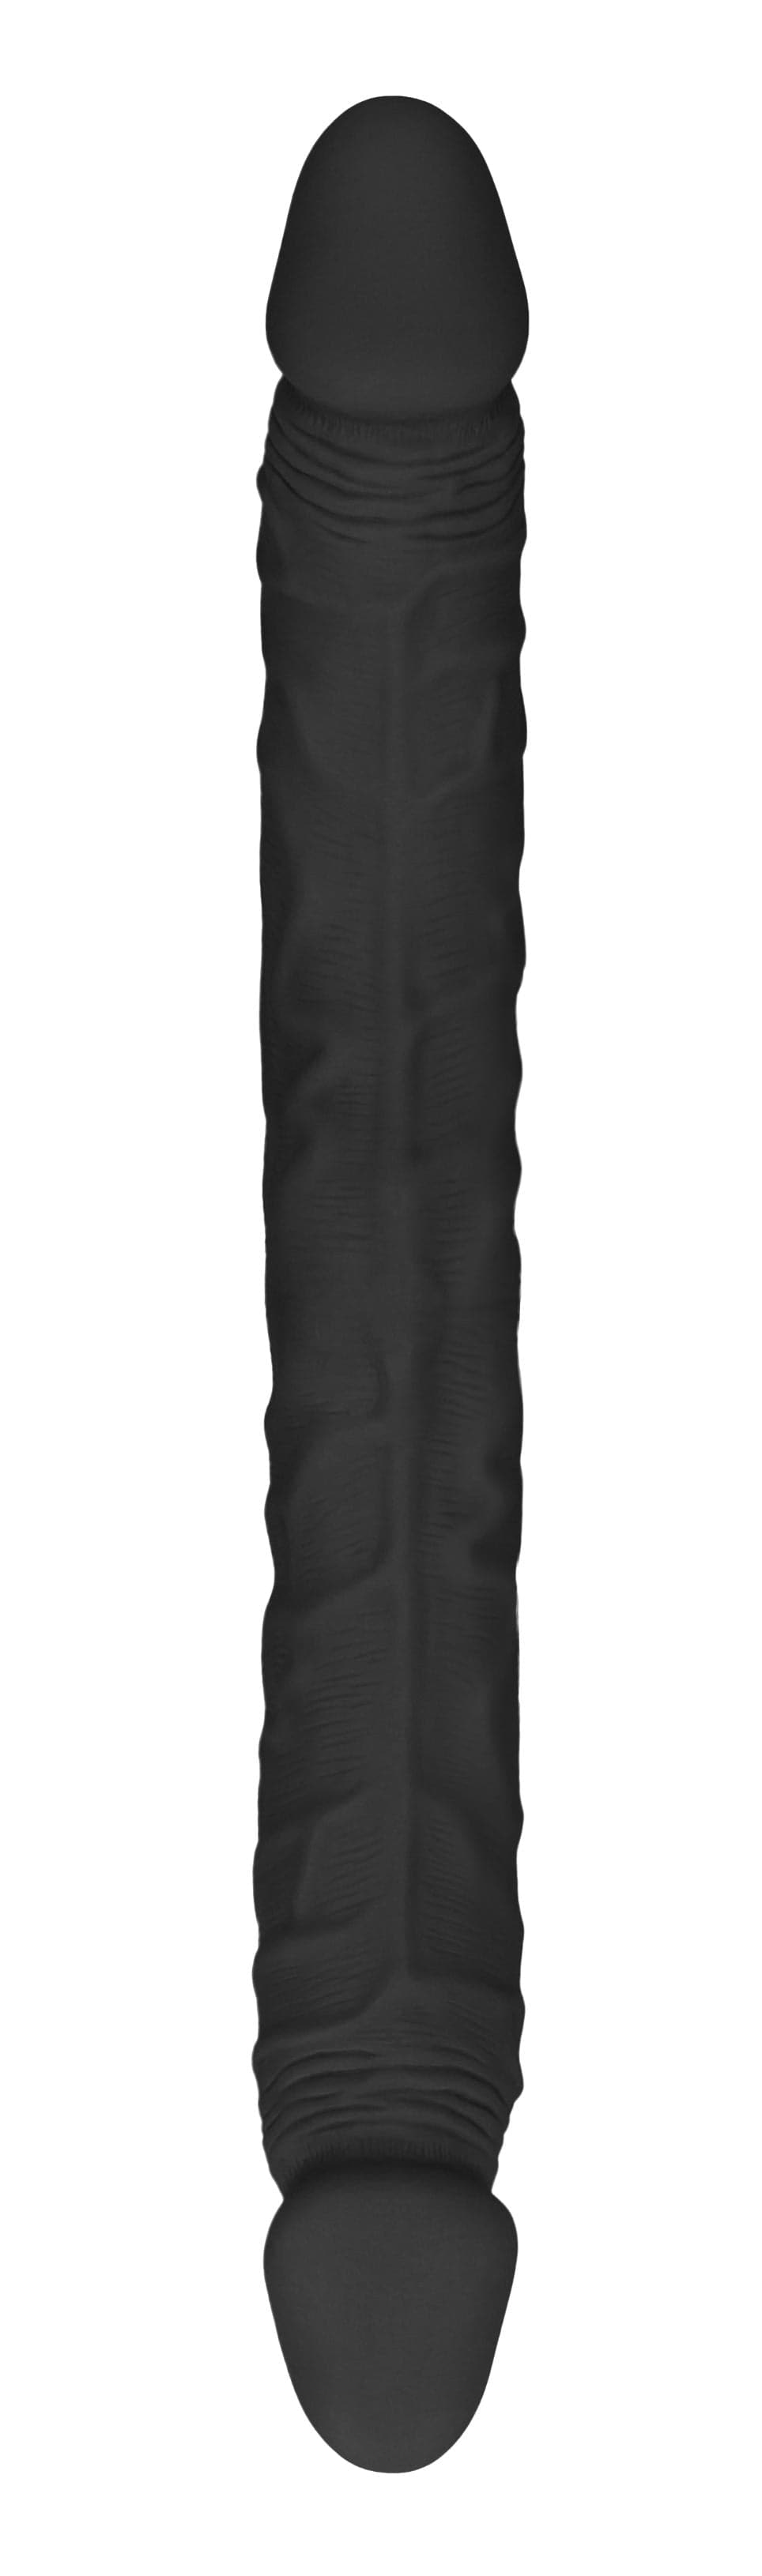 18 inch double dong black